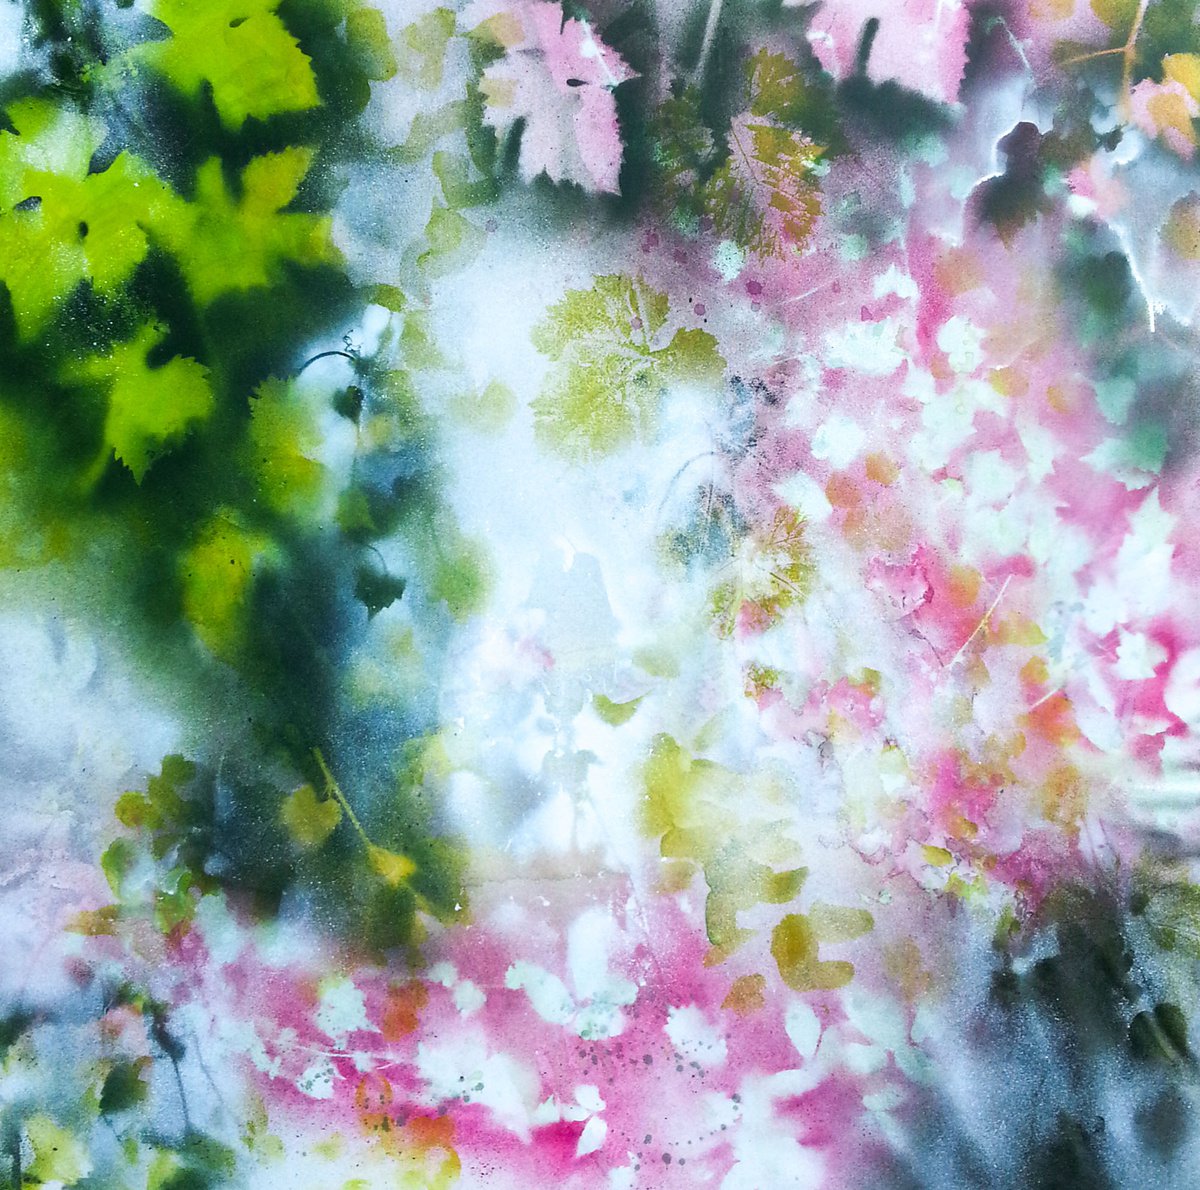 Foliages - Floral abstract Large size READY TO HANG Wall art original by Fabienne Monestier